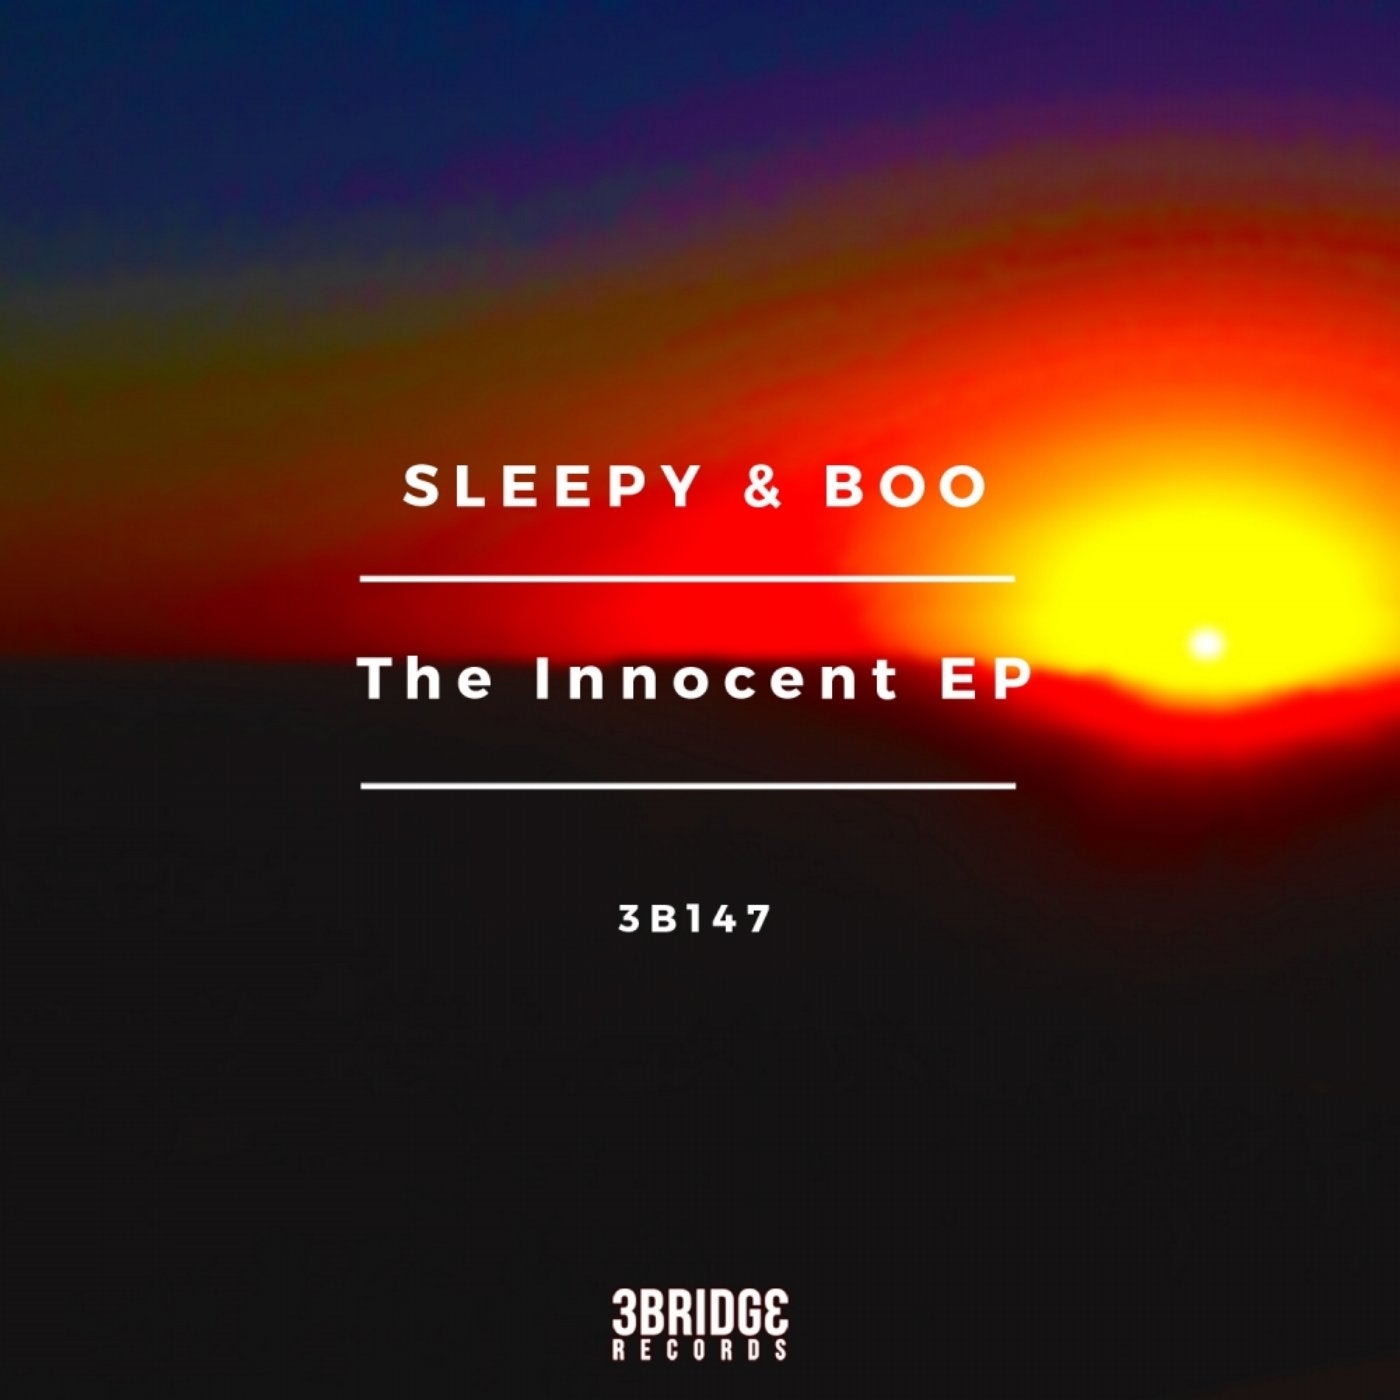 The Innocent EP